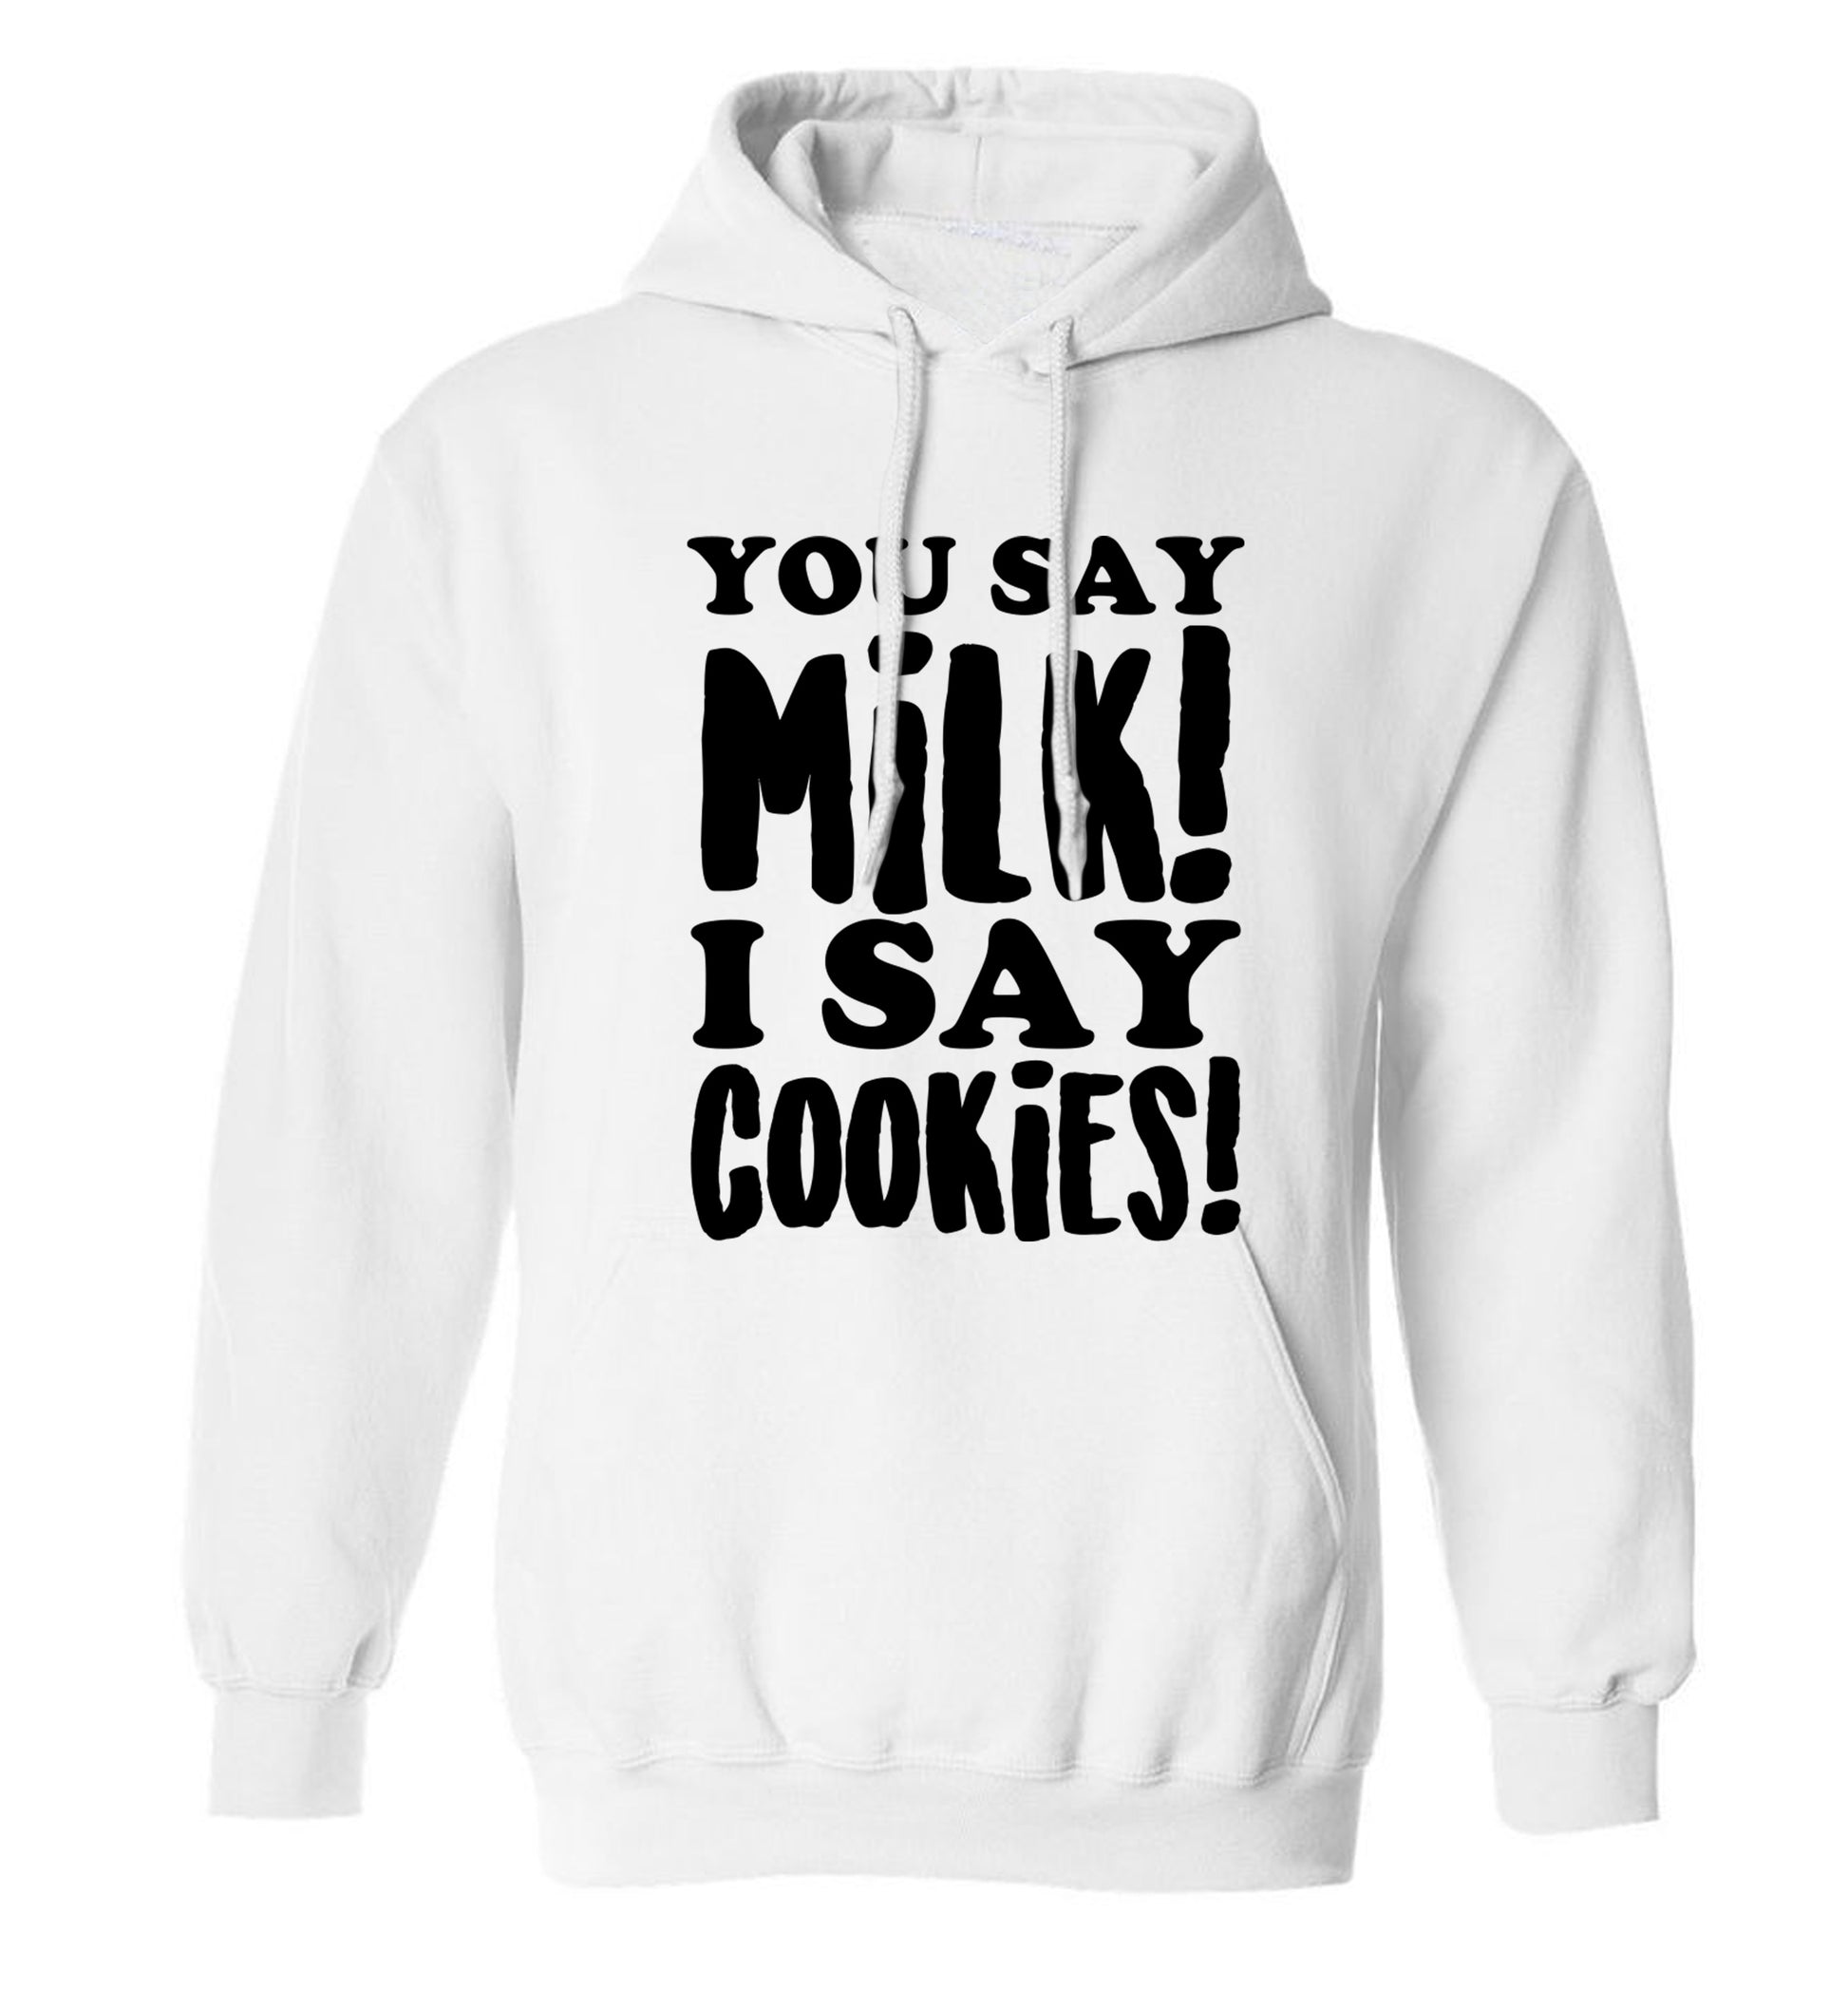 You say milk I say cookies! adults unisex white hoodie 2XL